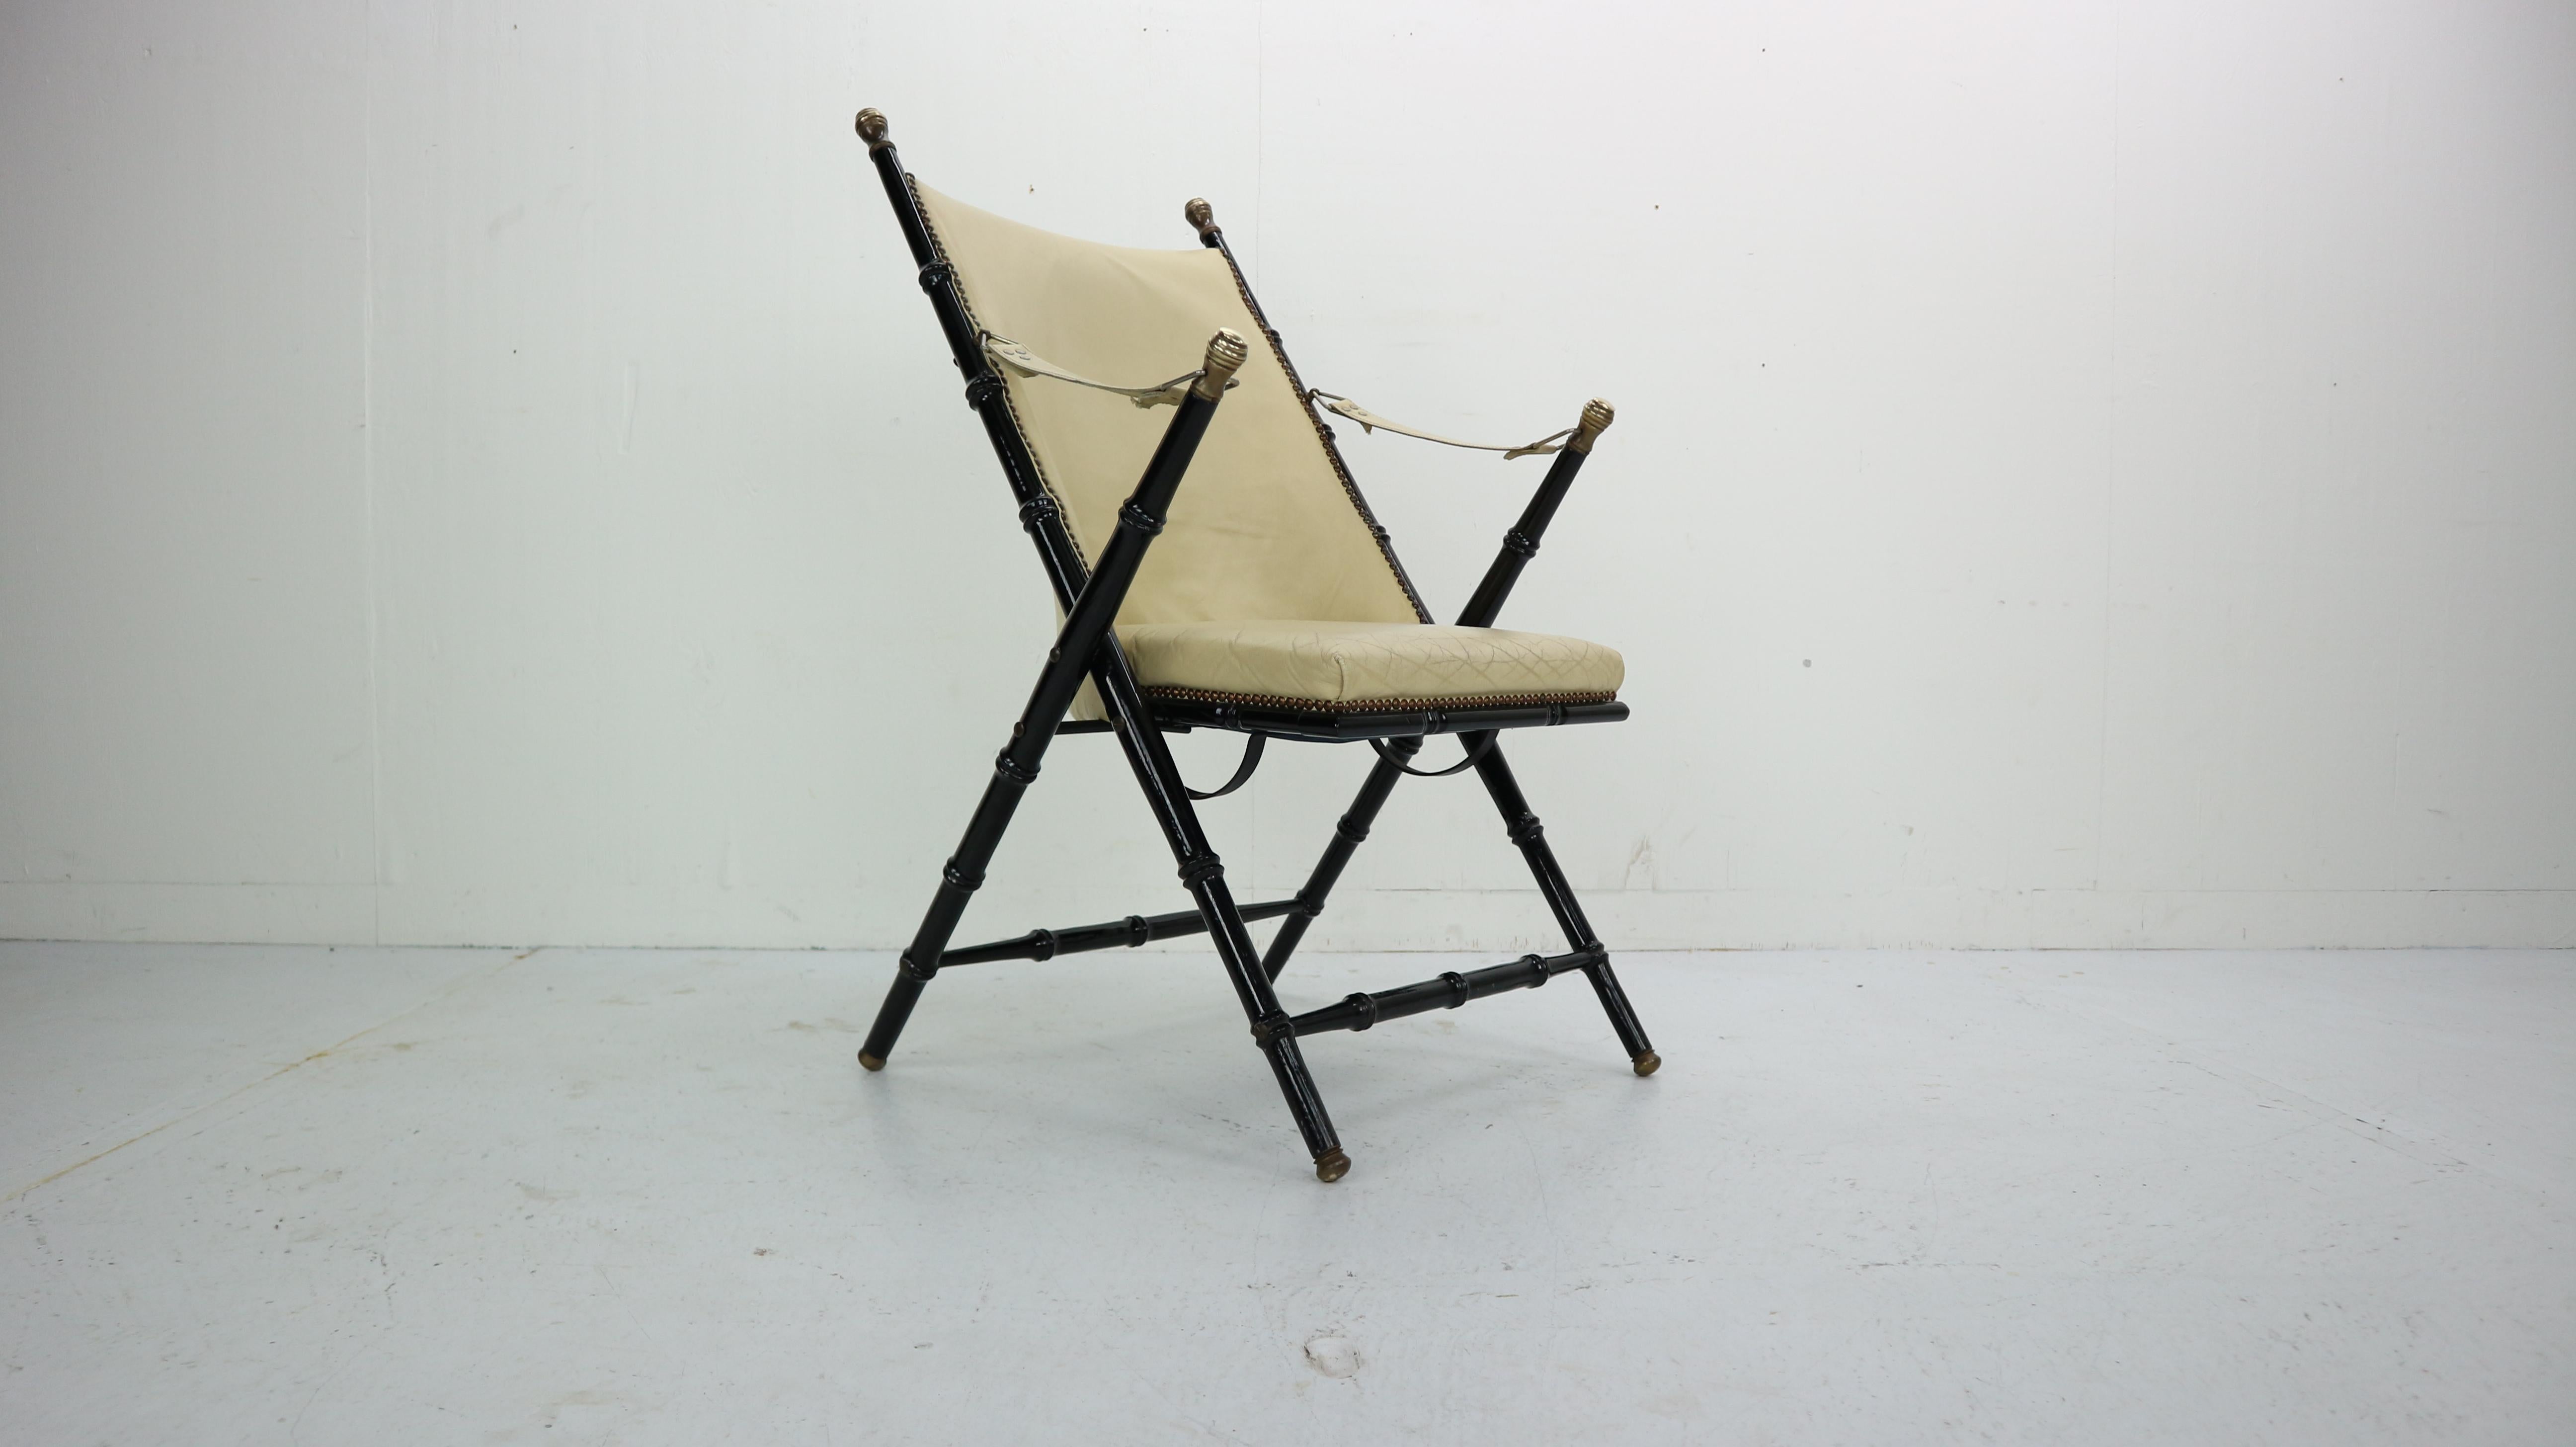 This leather and wood folding chair was produced by Valenti in the 1970s, Spain.
The chair has its original white leather upholstery, faux bamboo wooden frame, and brass knobs.

   